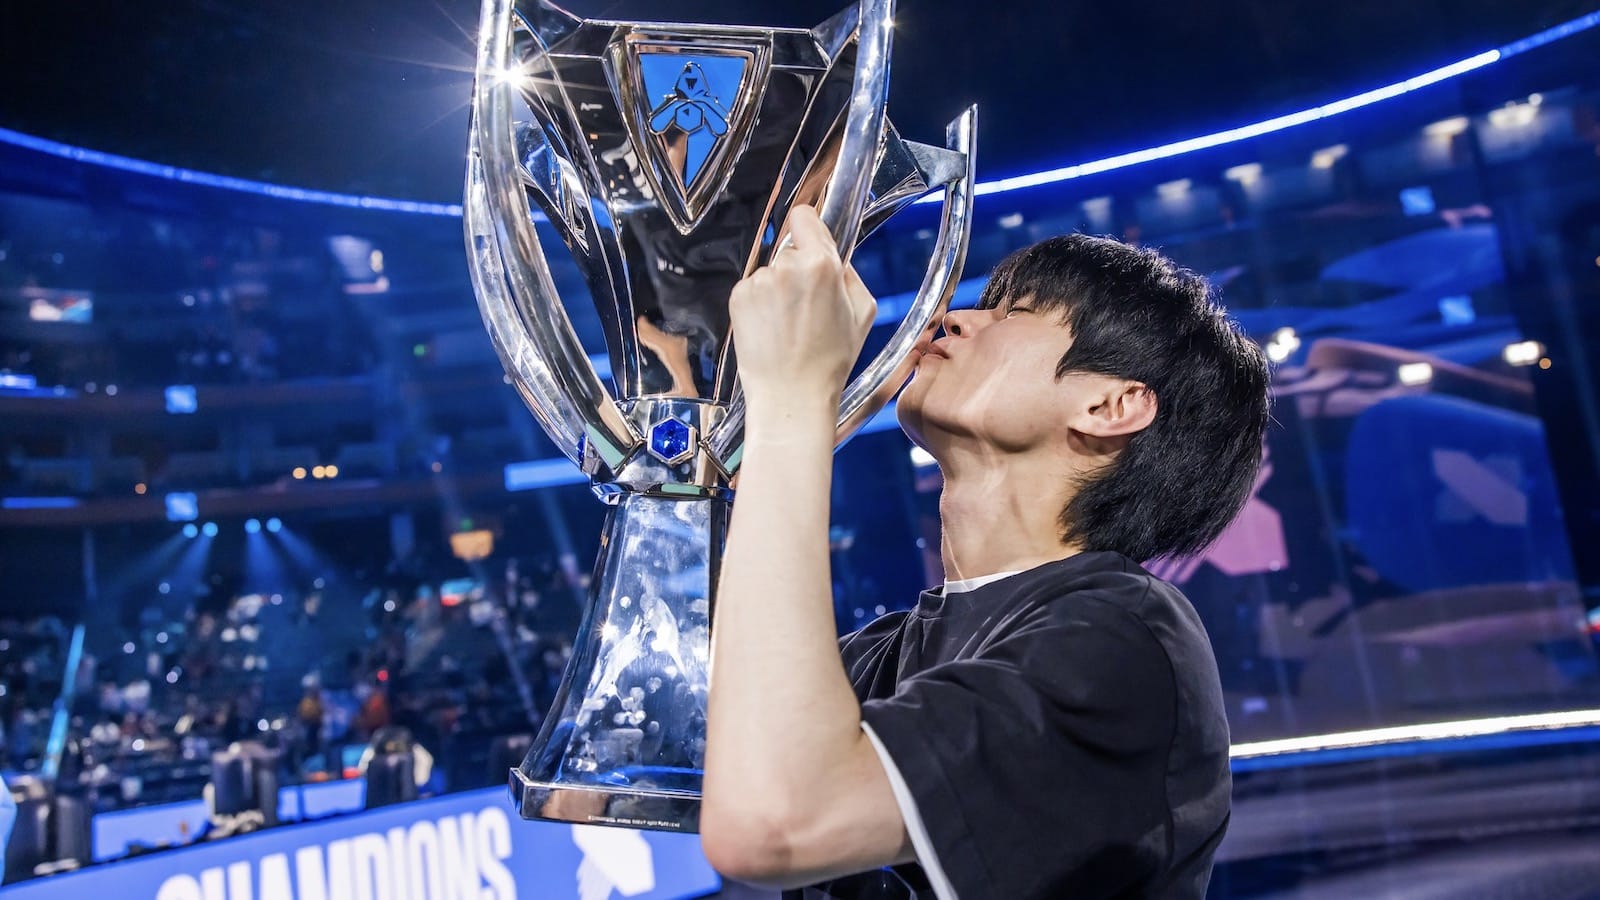 Deft’s first world championship in his decadelong career ‘felt like a